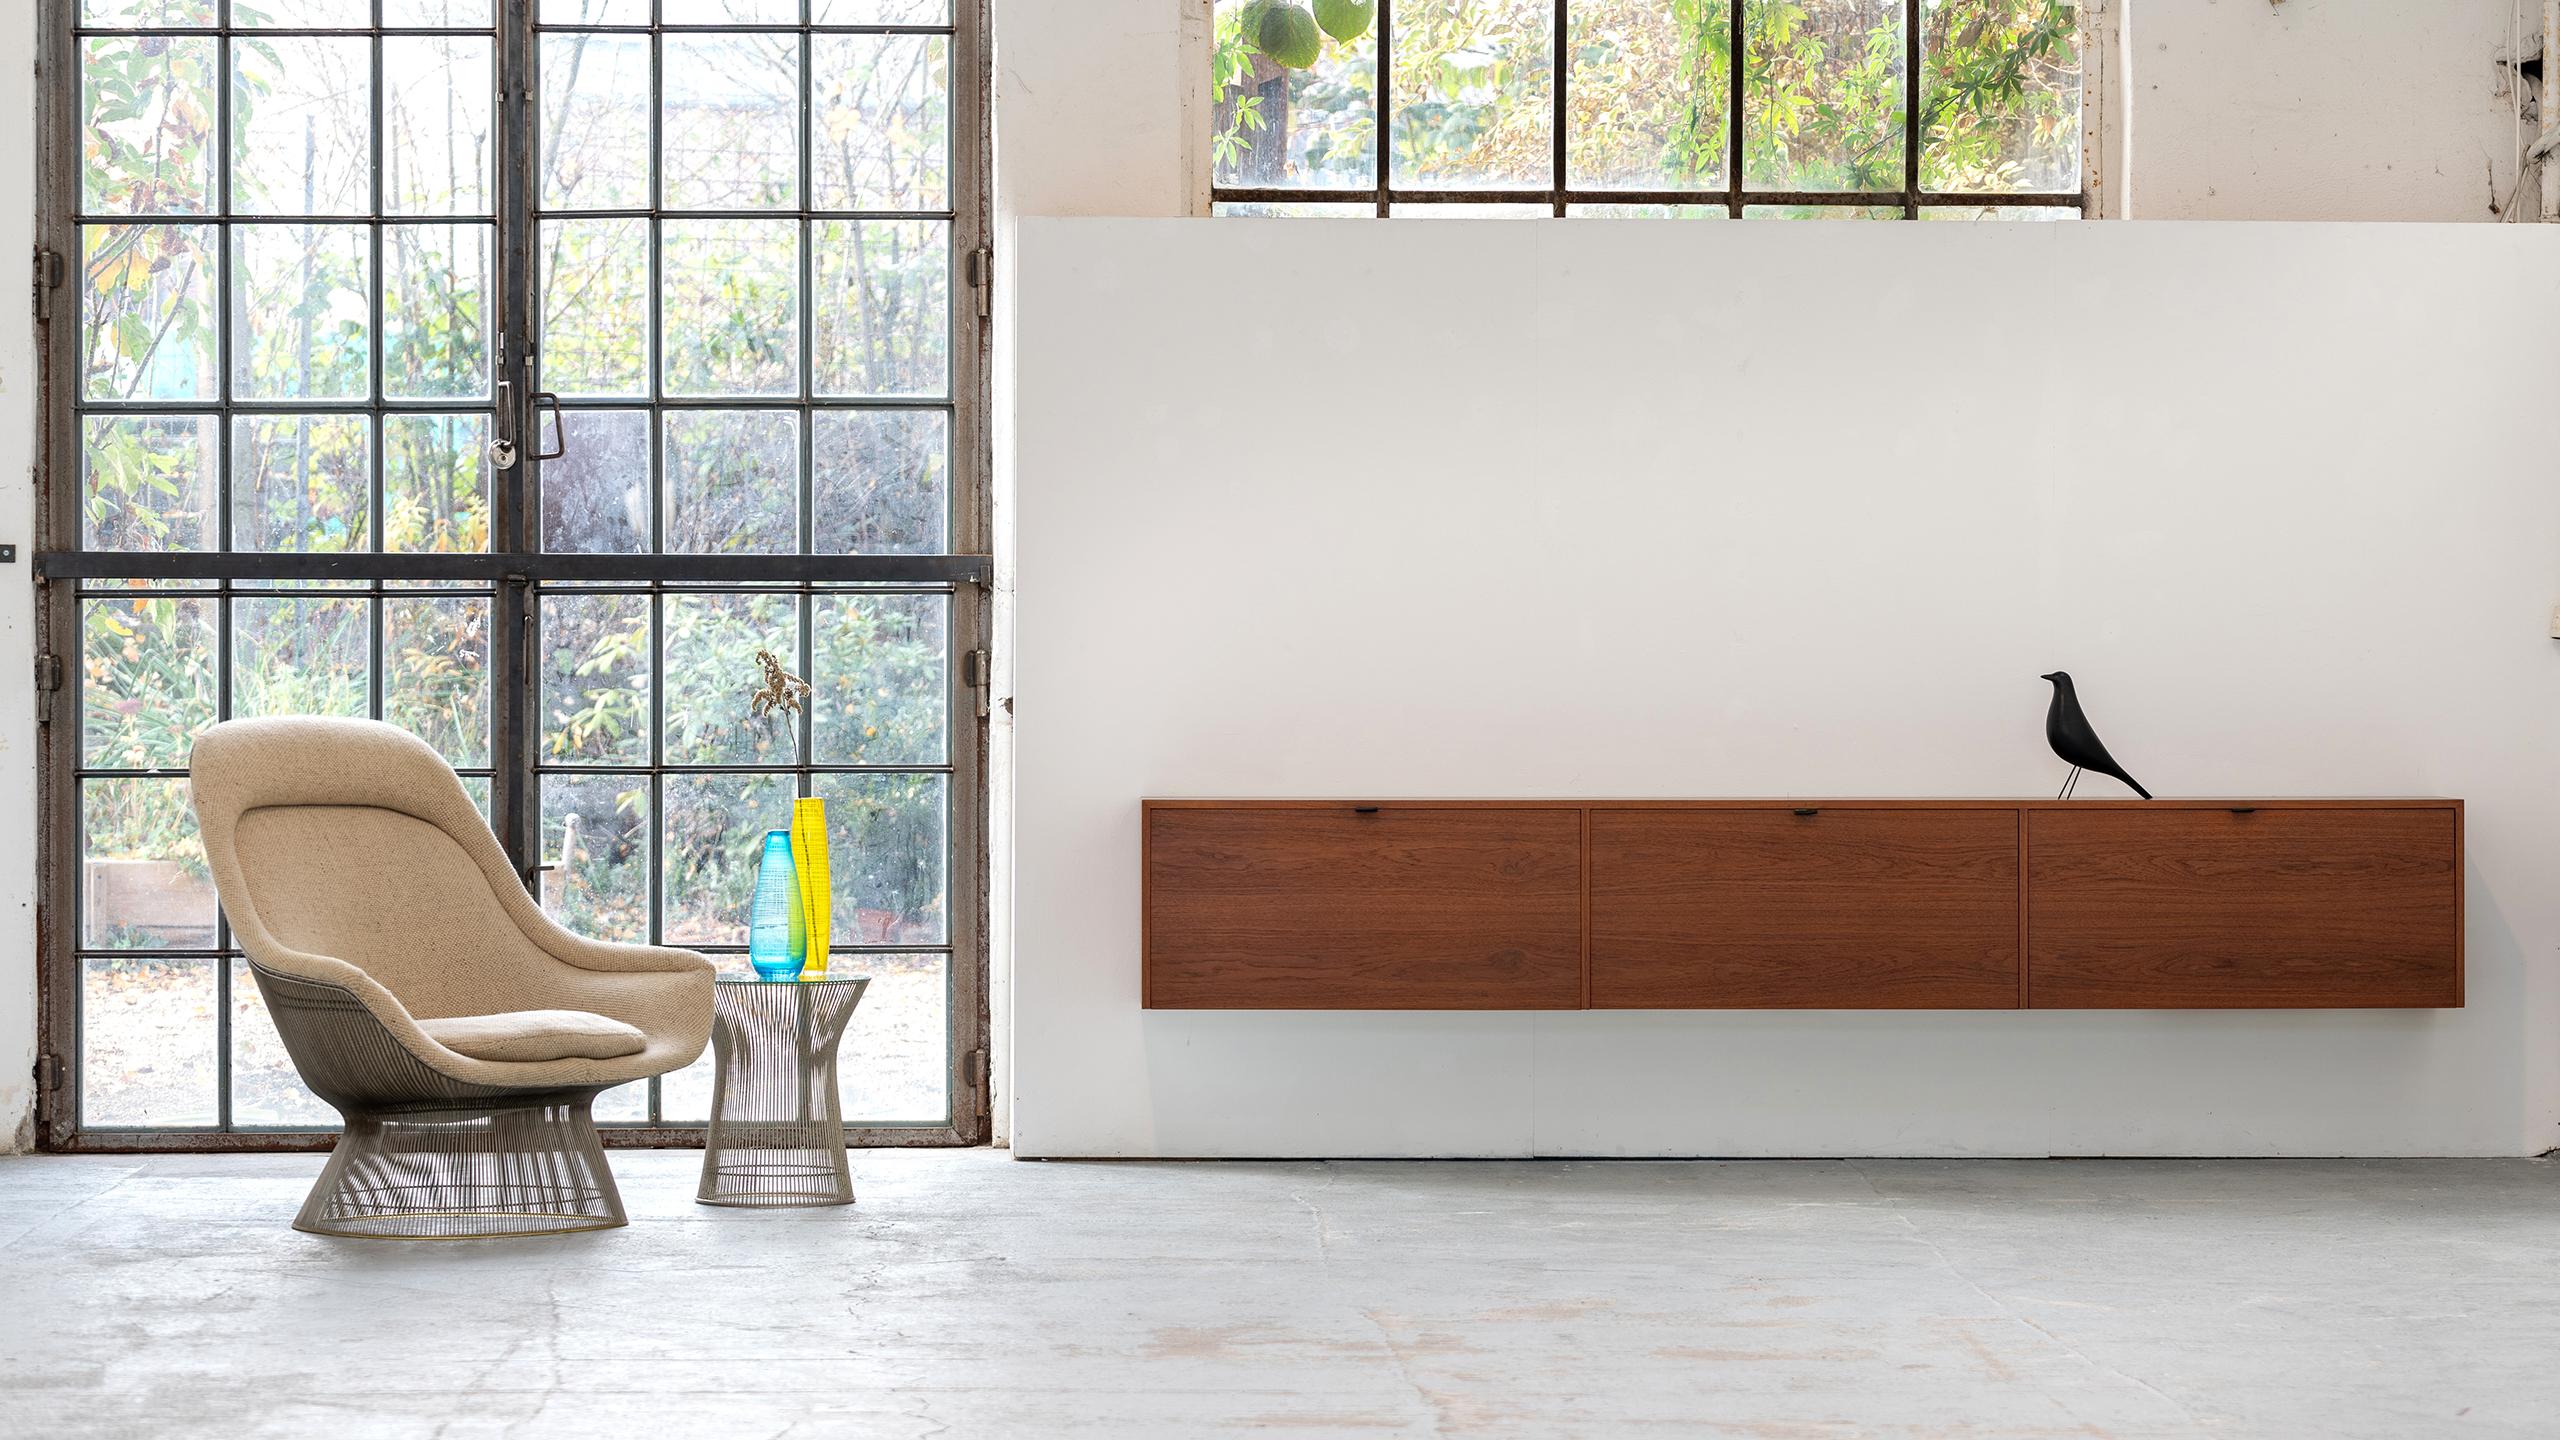 Wall mounted sideboard unit by Florence Knoll, made by Knoll International, Stuttgart in 1954.

Rare opportunity to acquire an original Knoll International custom-made Florence Knoll wall-mounted sideboard in special width. Normally these pieces